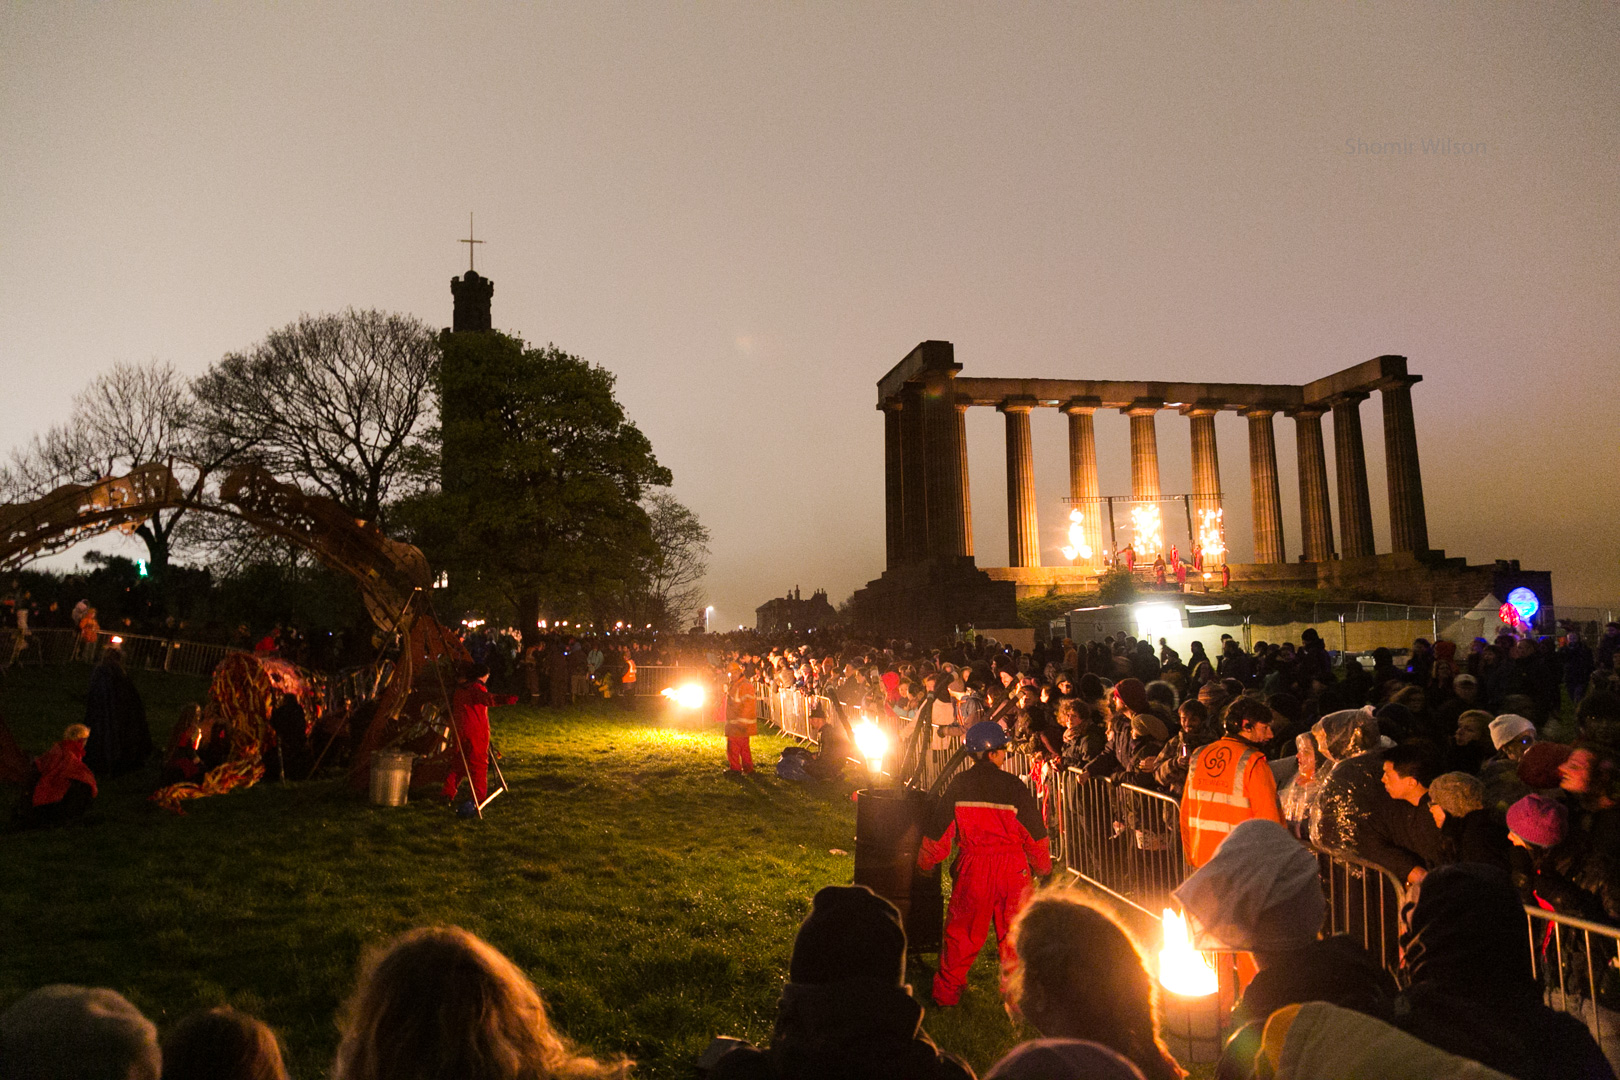 A crowd and event performers with fire at dusk